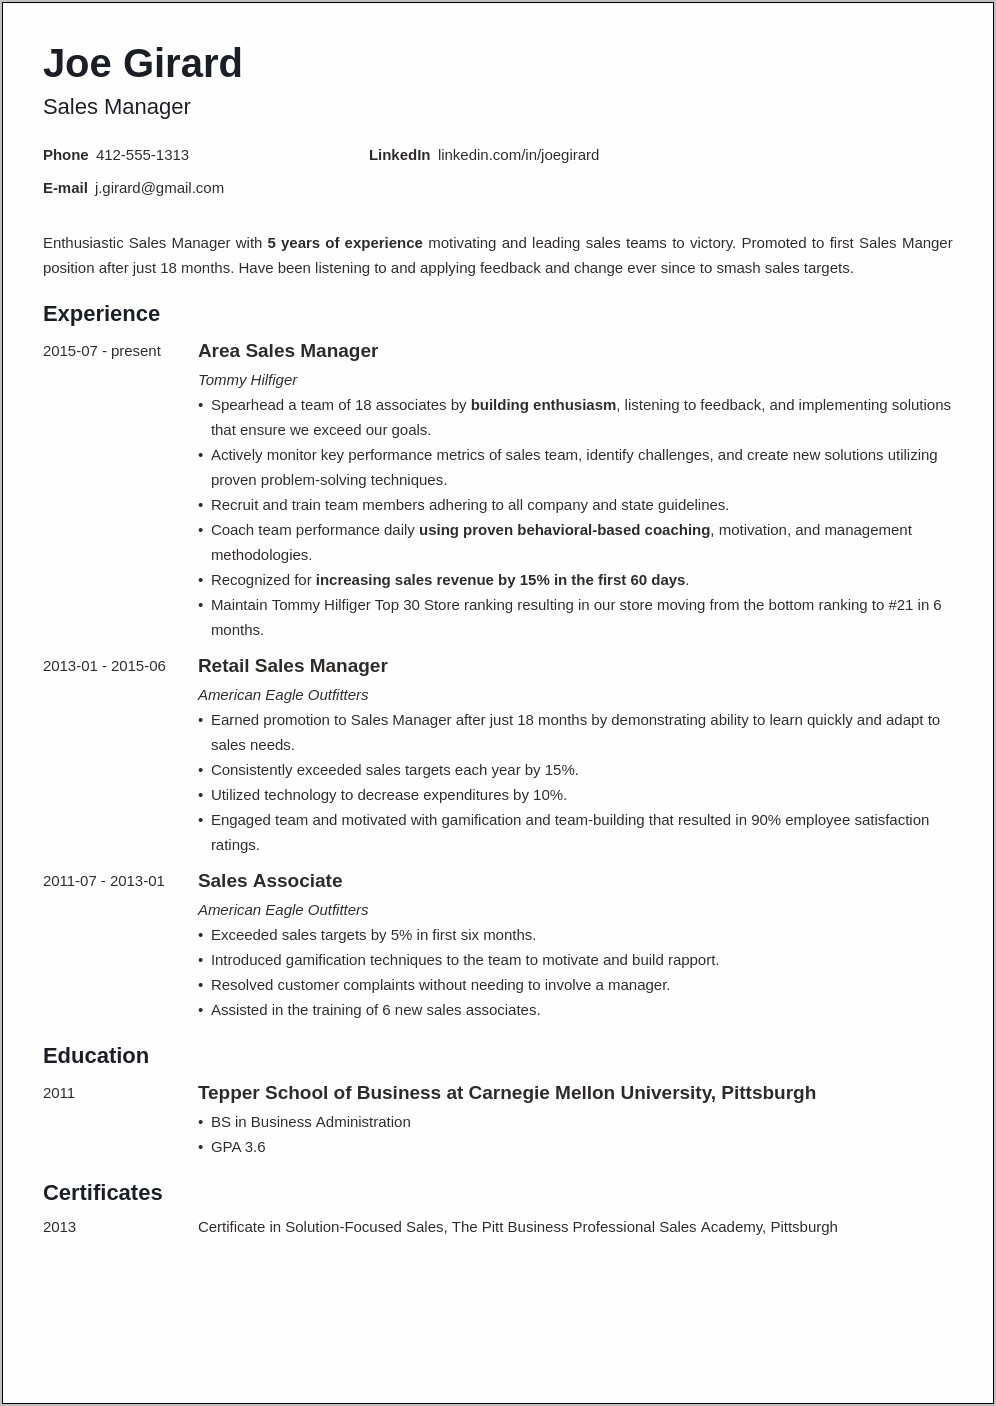 Resume For The Post Of Assistant Sales Manager